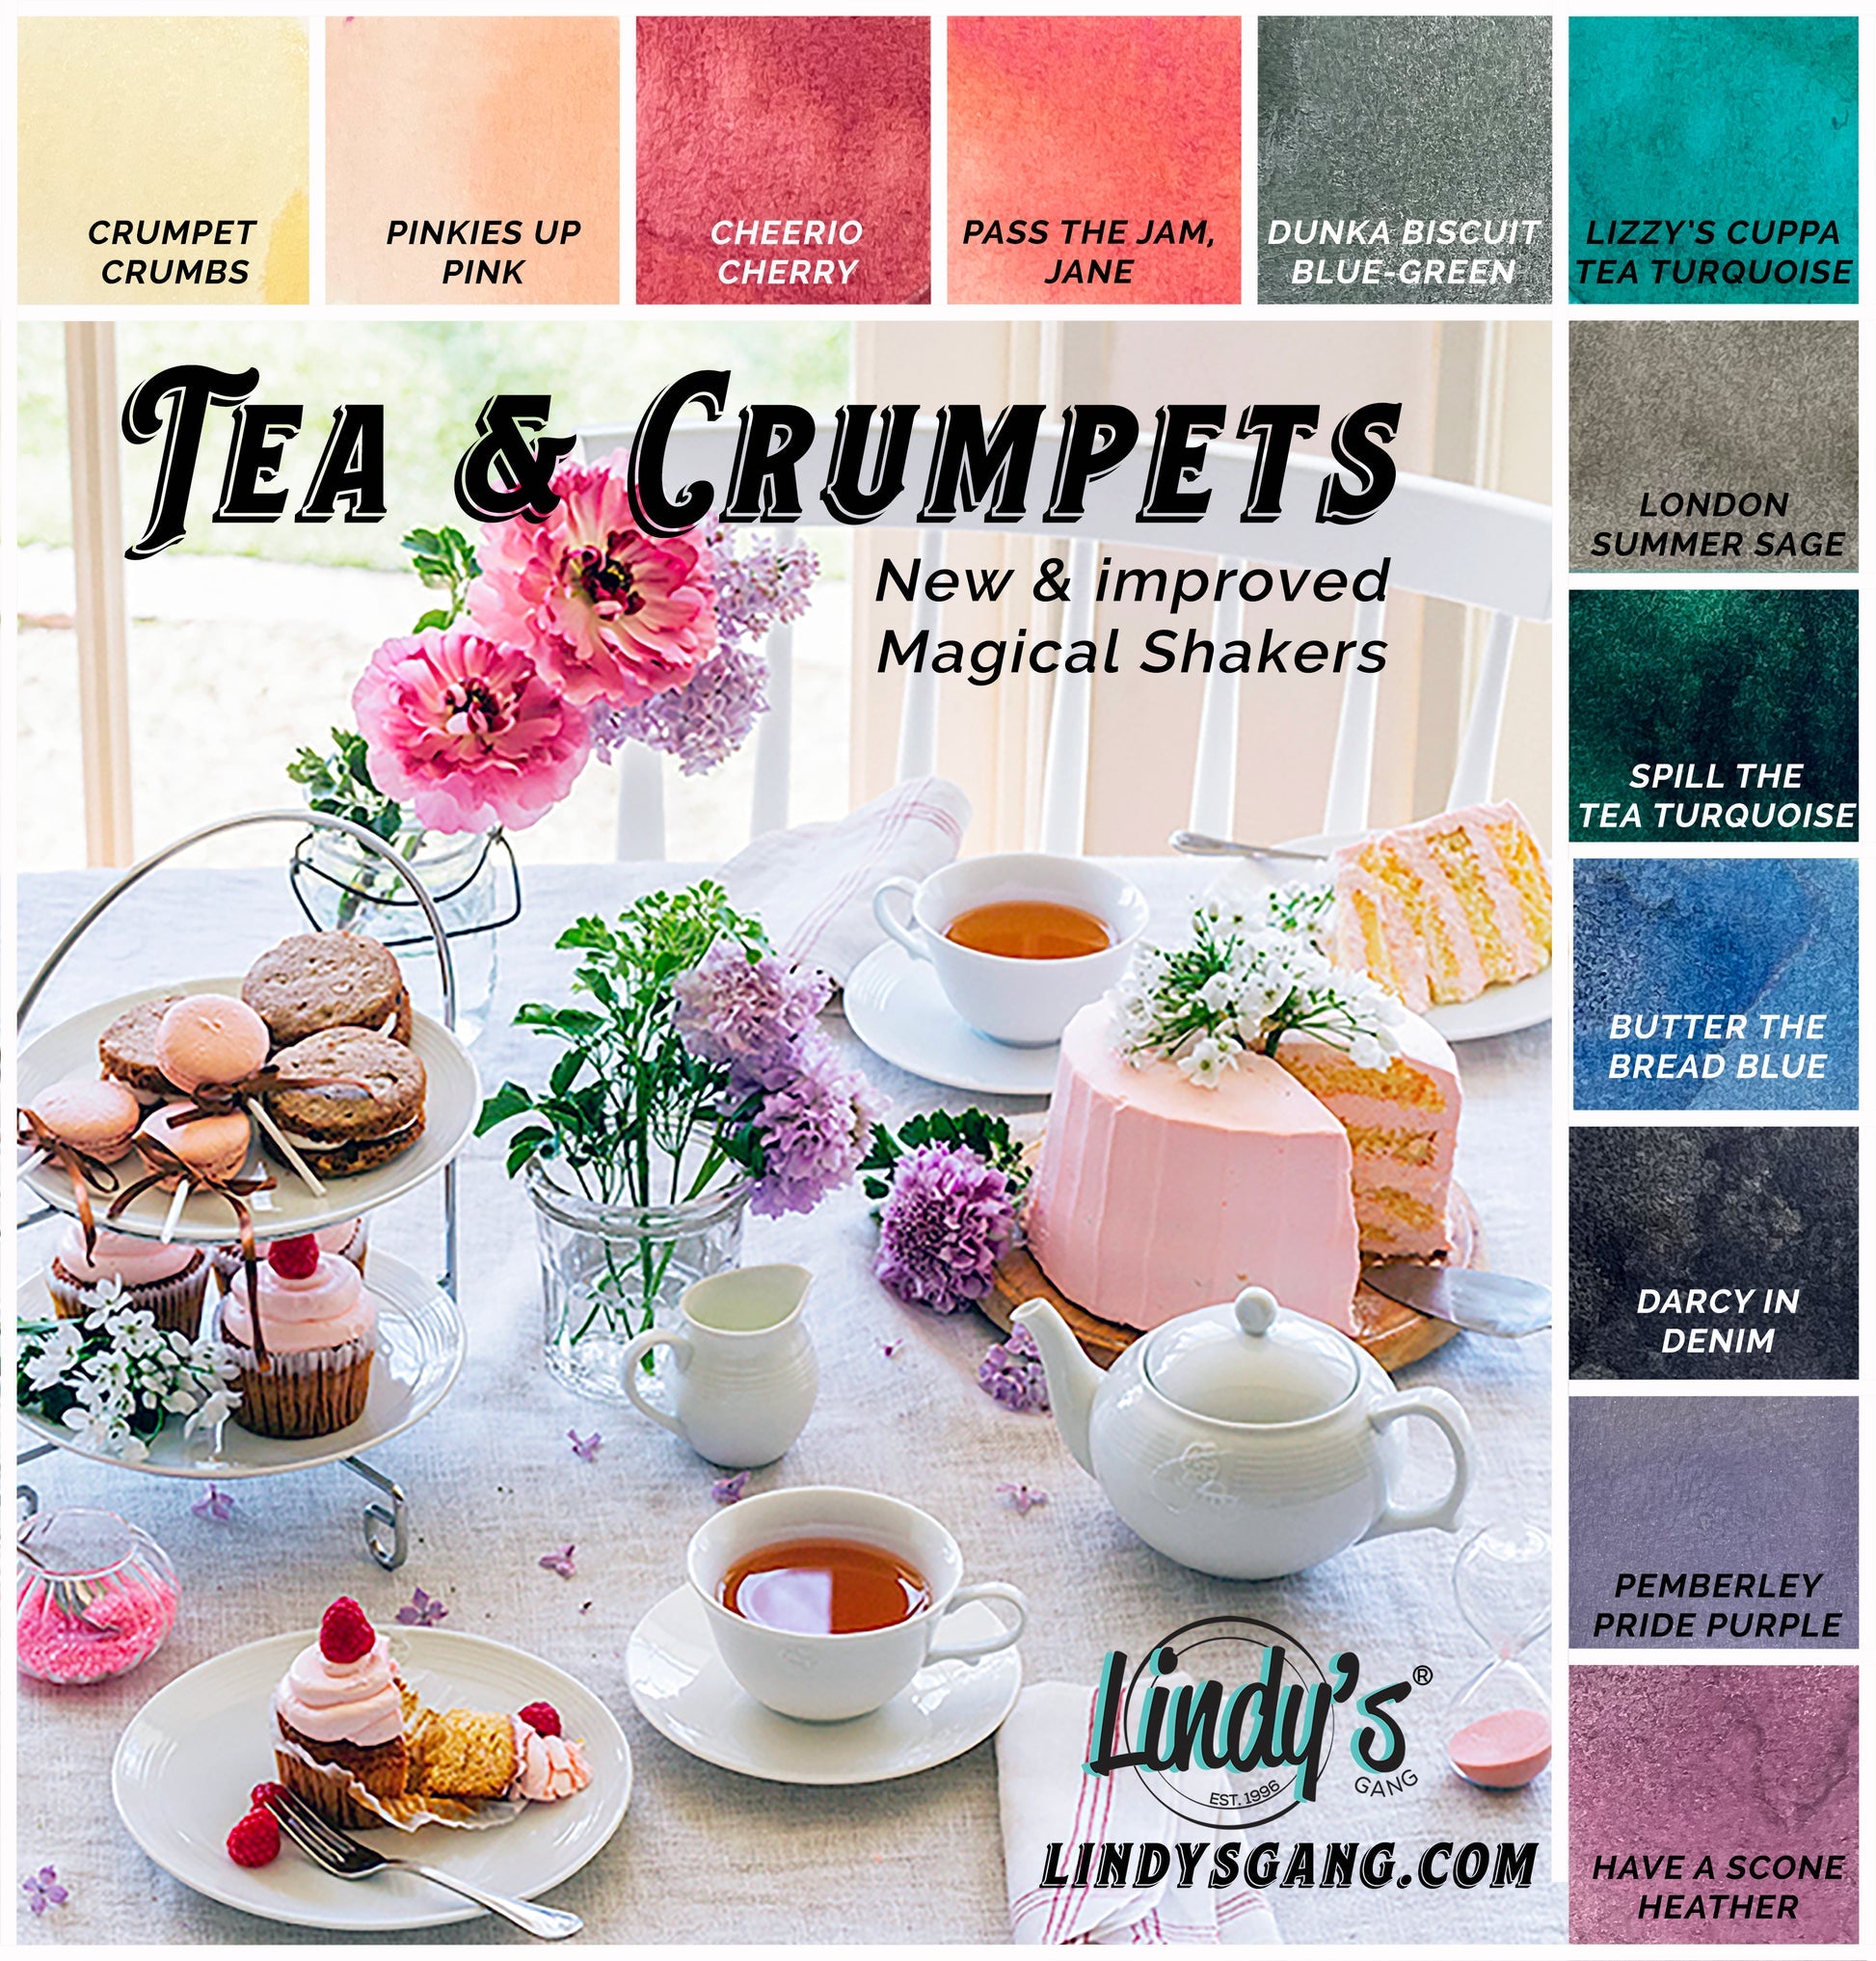 Lindy's Gang Tea & Crumpets NEW Magical Shakers 12pack